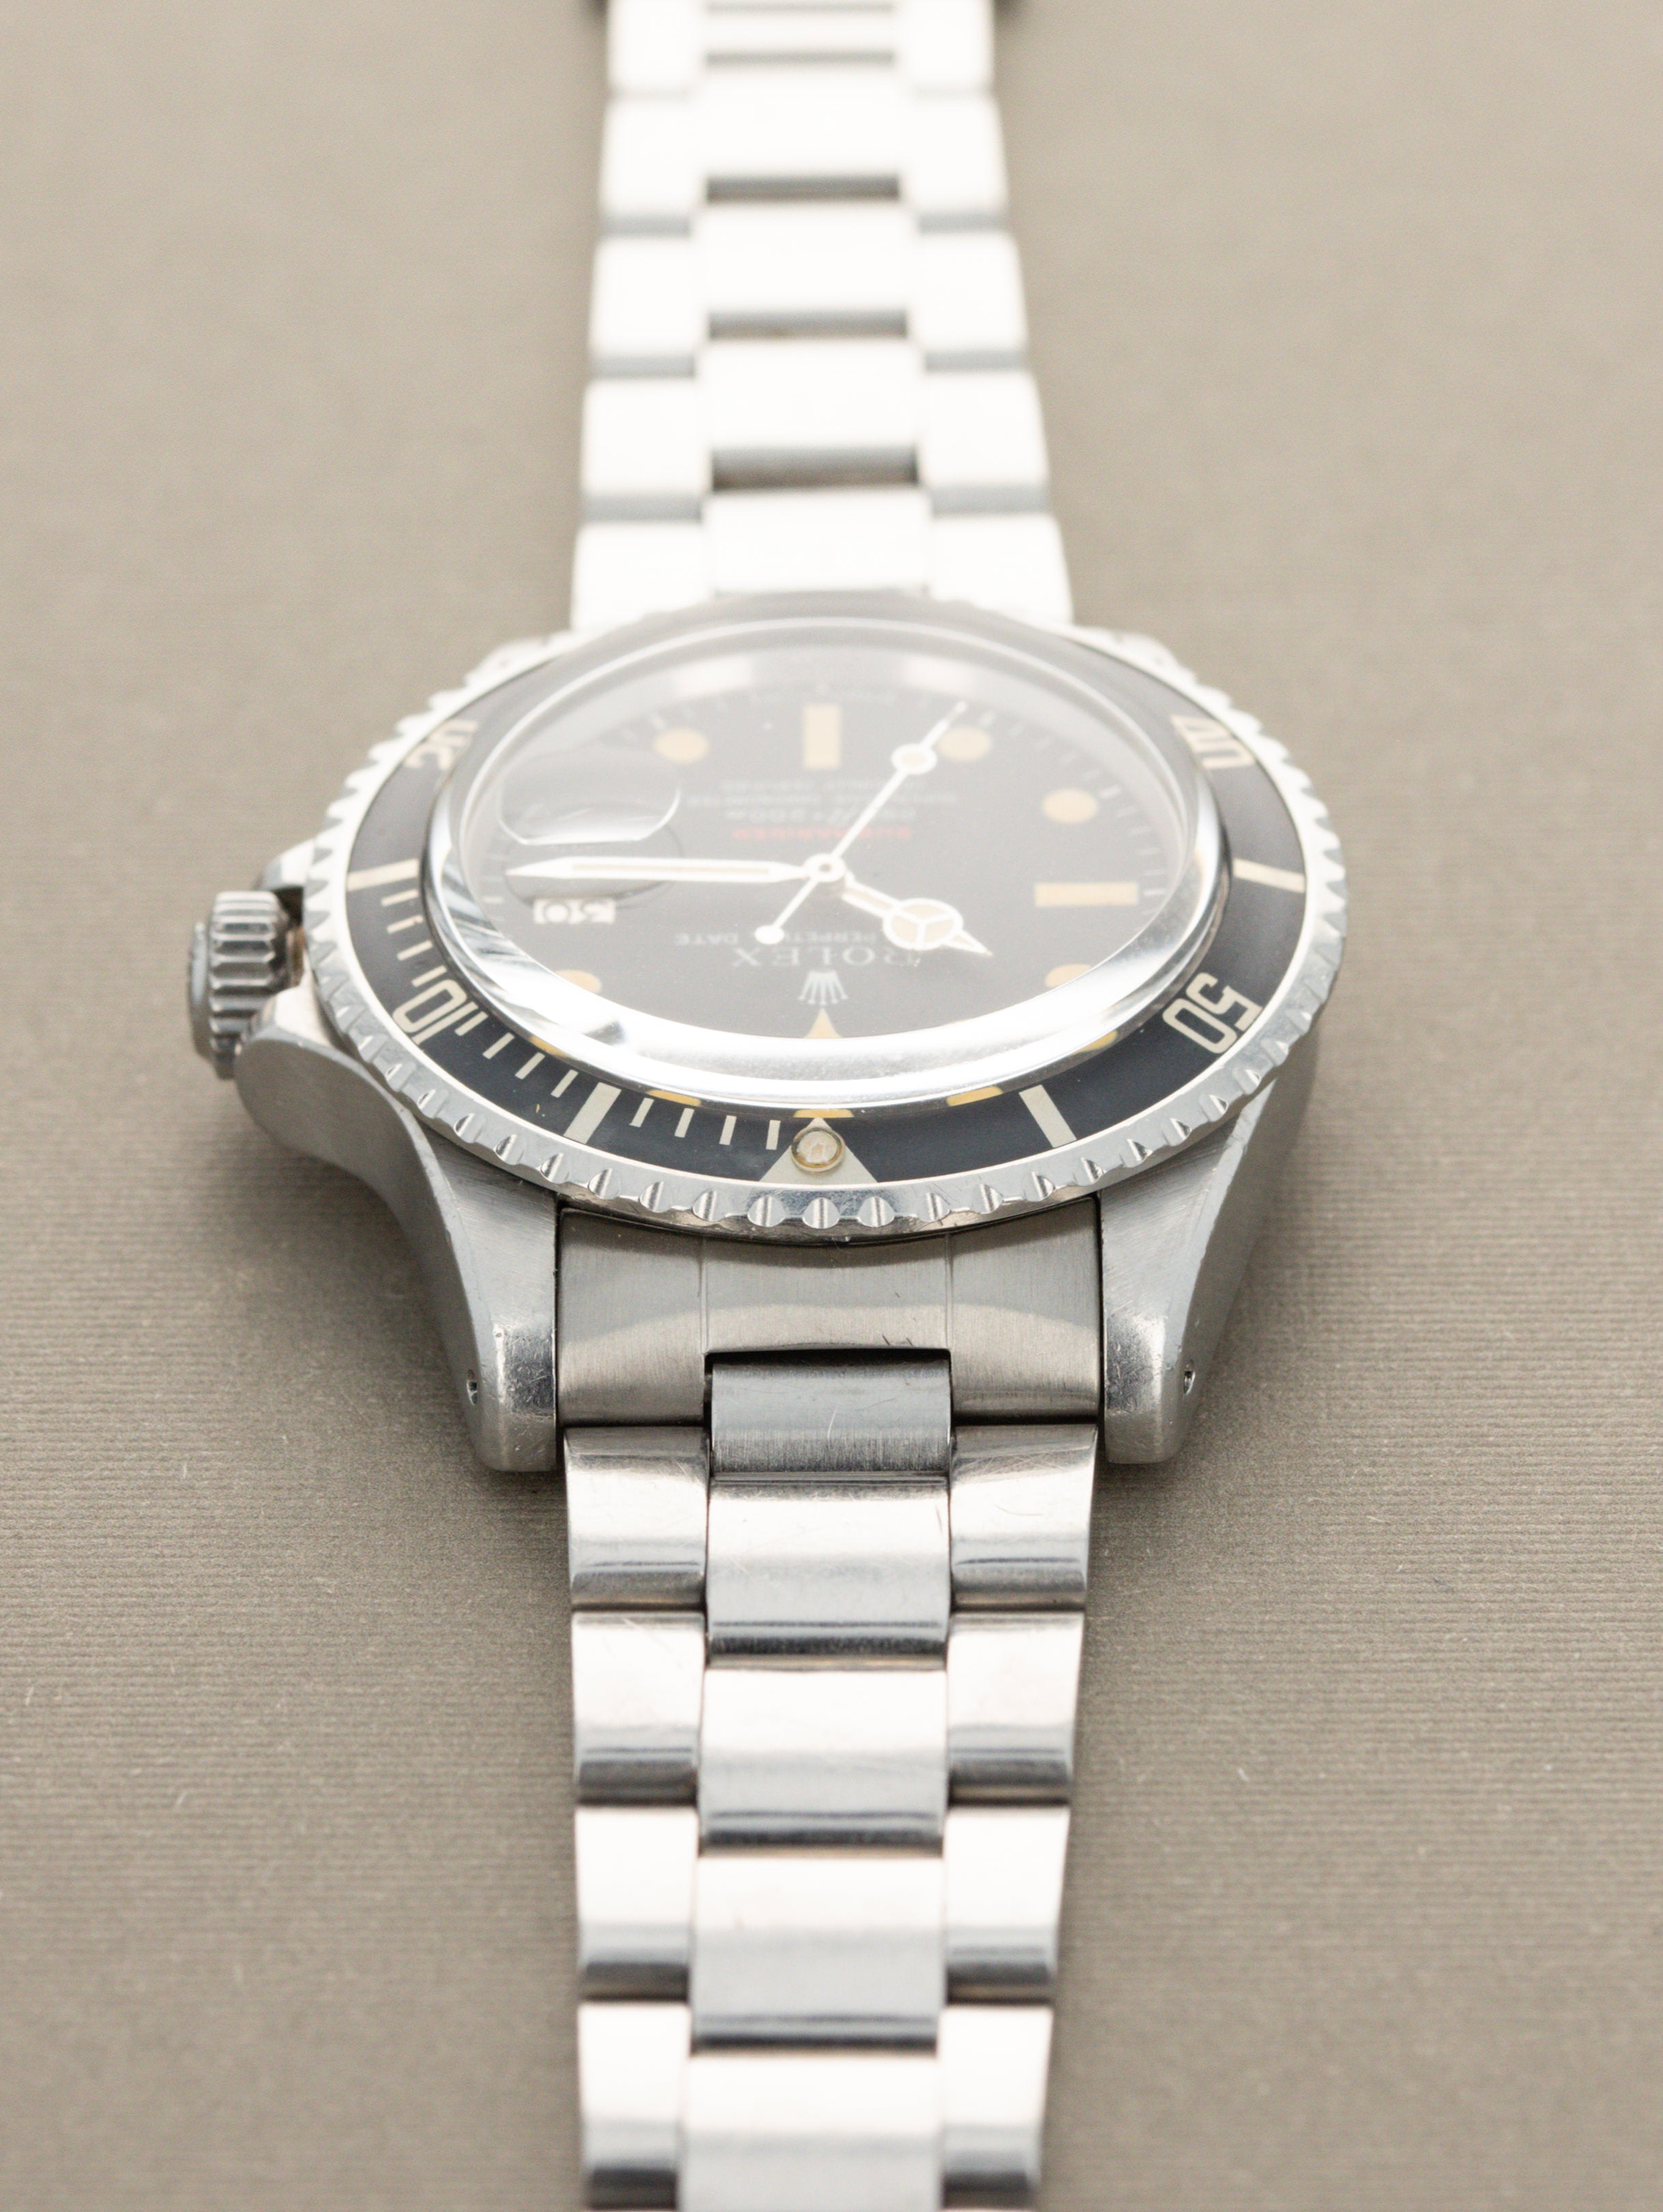 Rolex Submariner Date Ref. 1680 - MK4 'Red Sub' - Box & Papers